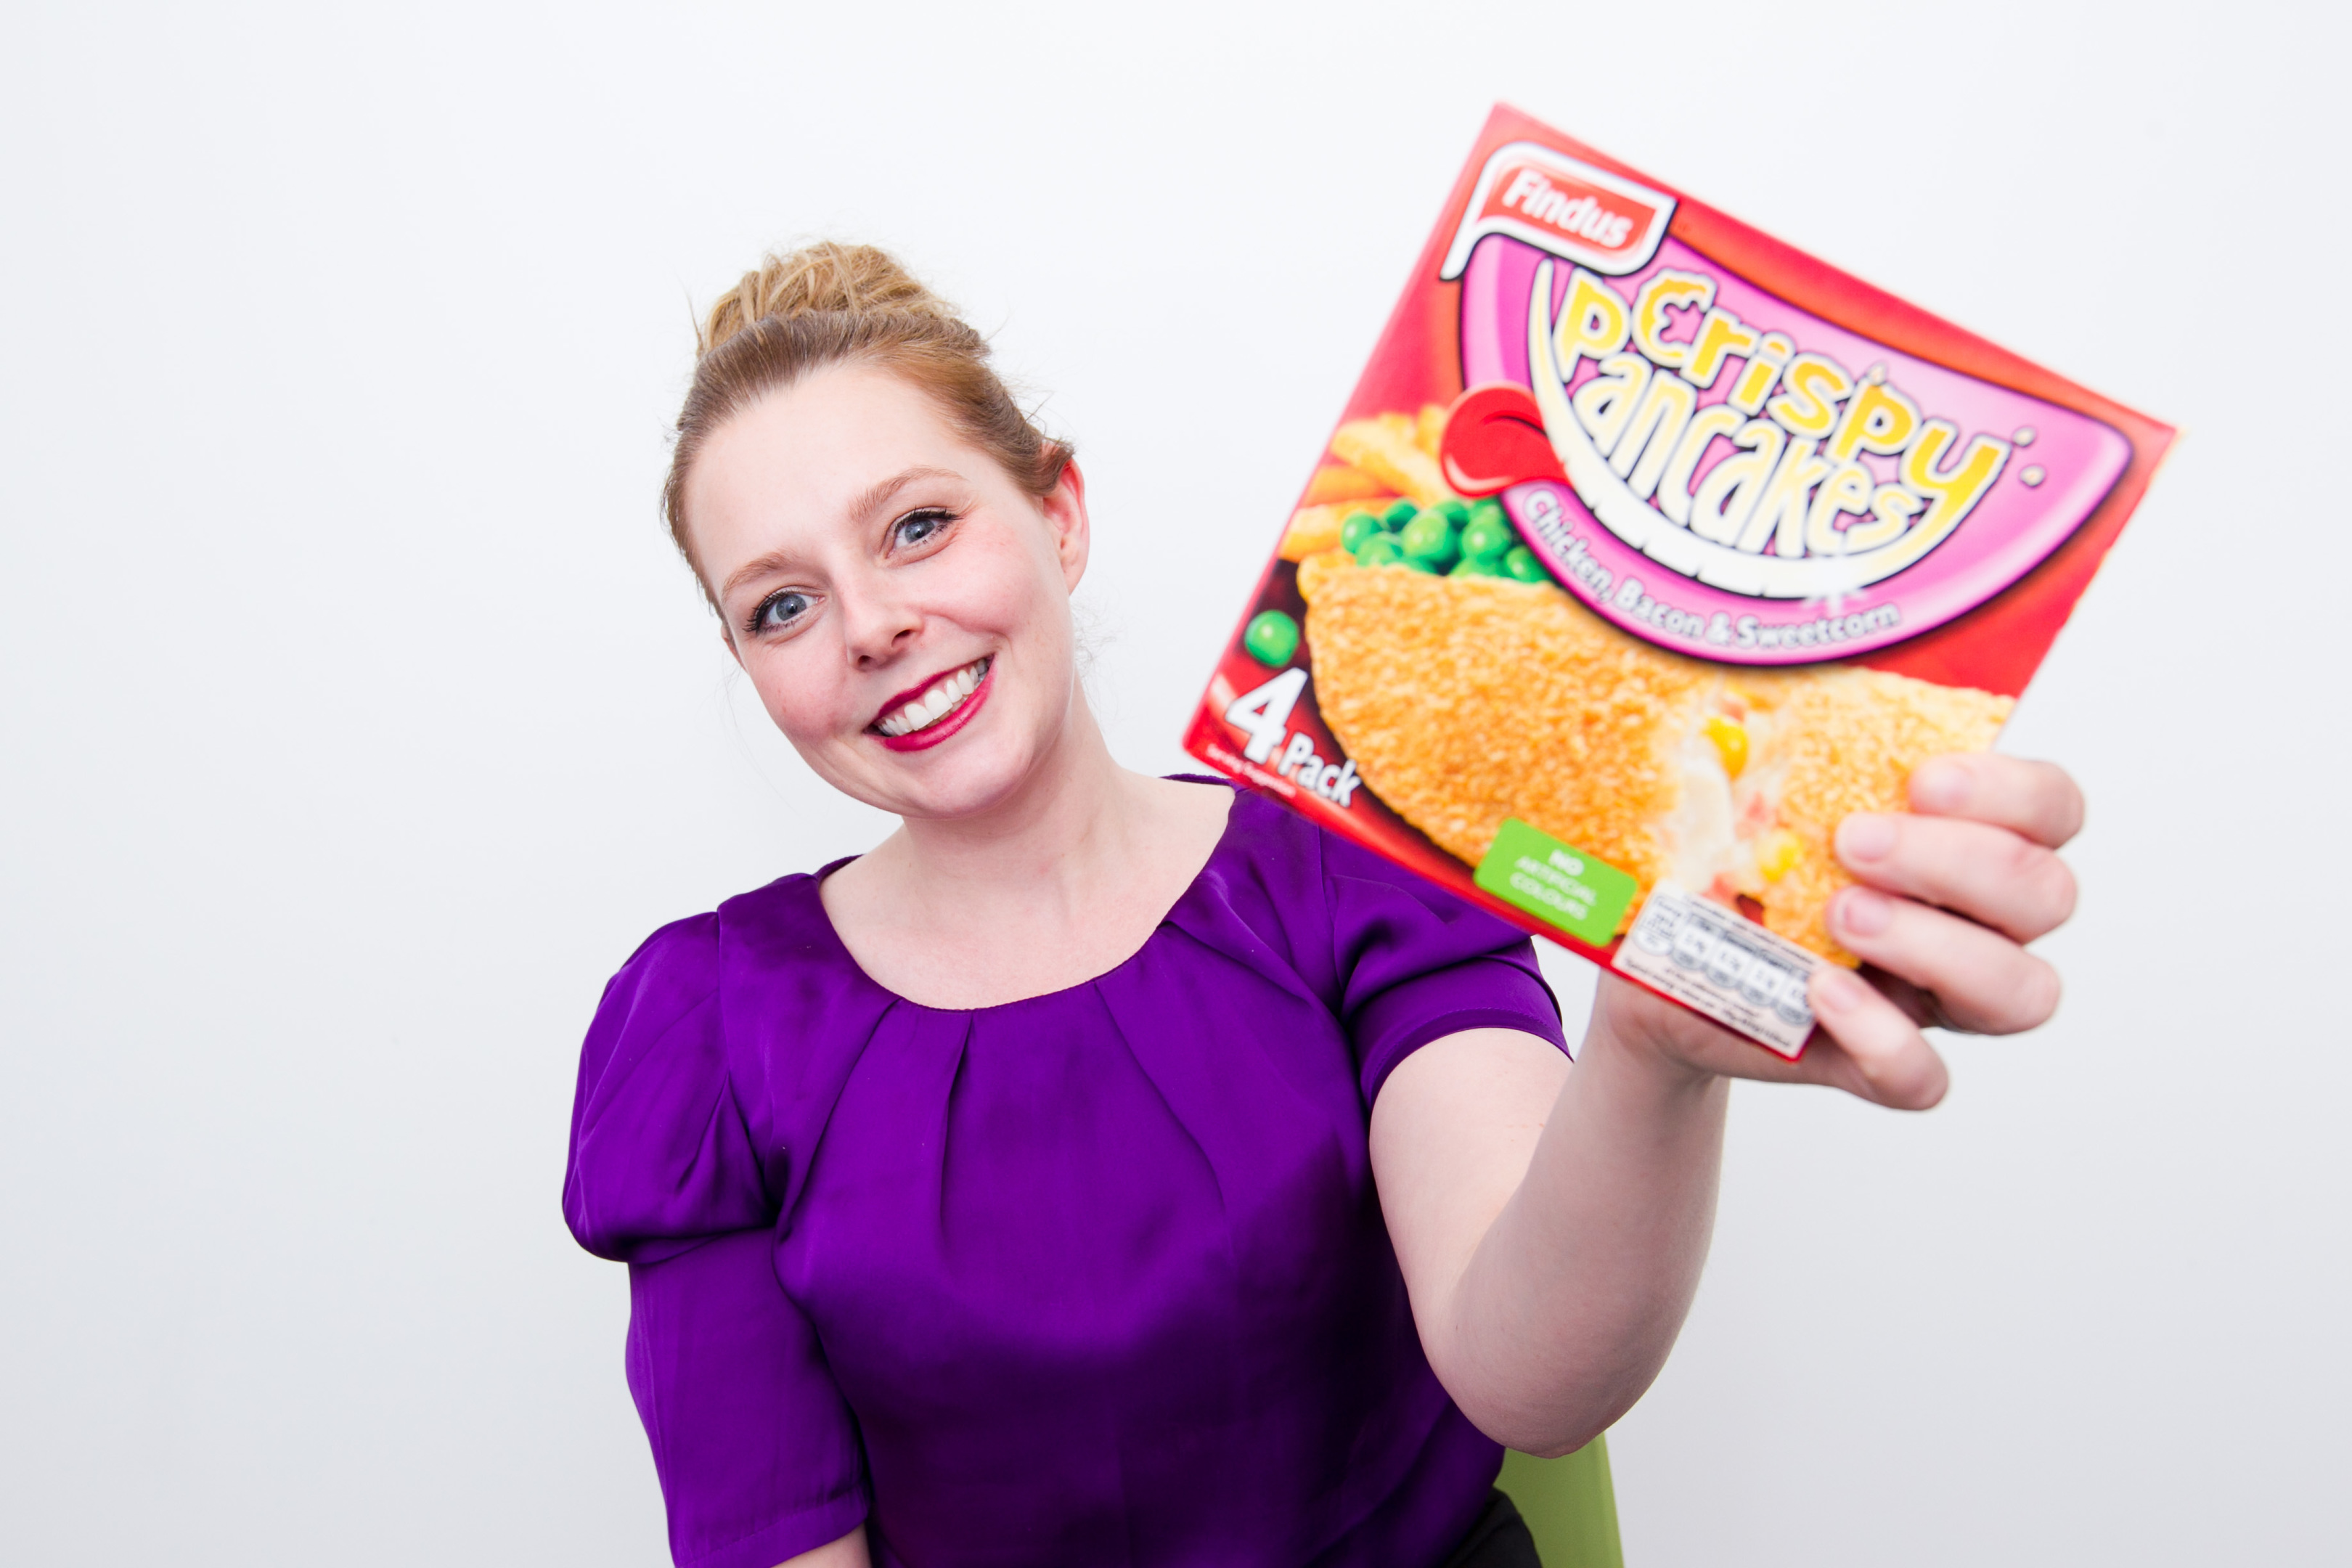 Findus Crispy Pancakes are being discontinued (Andrew Cawley / DC Thomson)